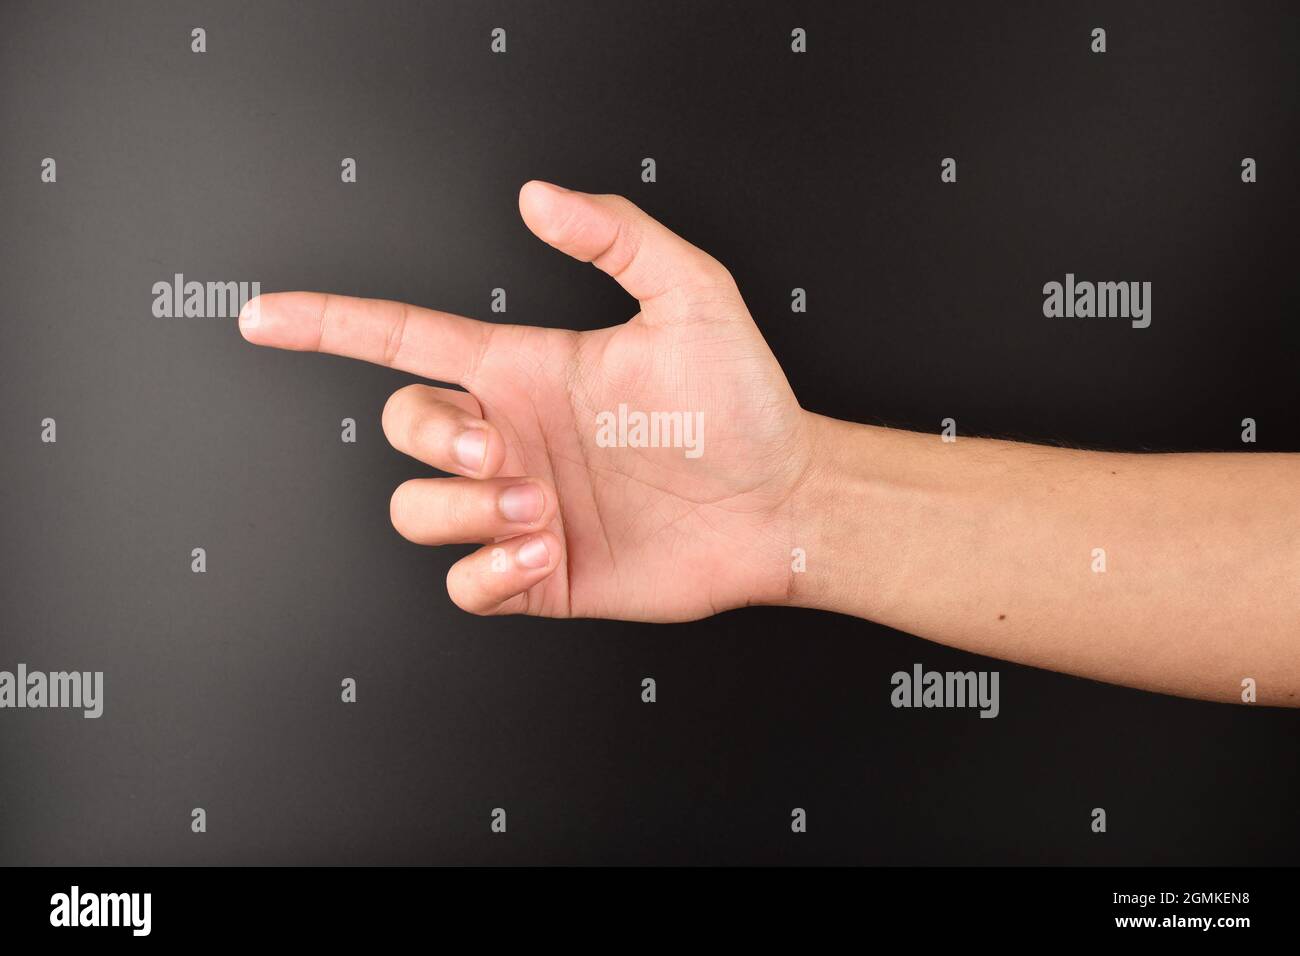 hand point out on black background, hand giving direction sign Stock Photo